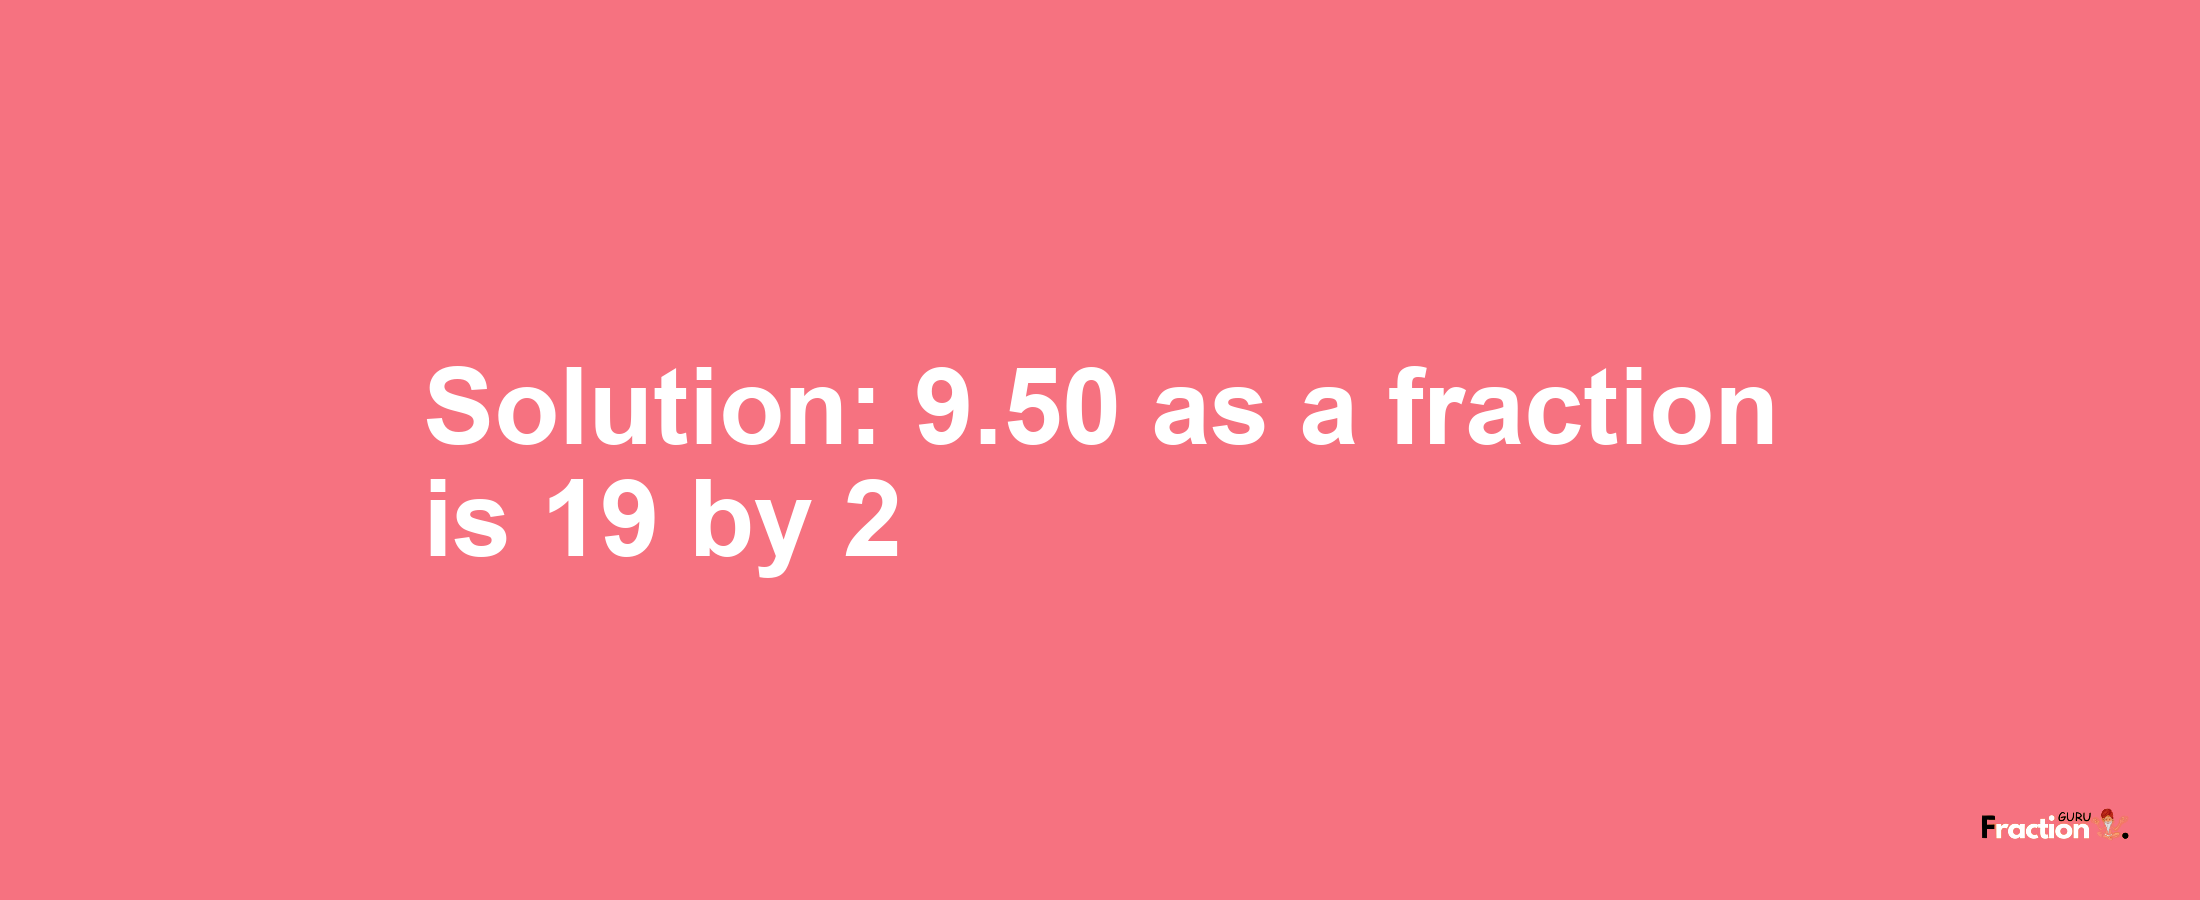 Solution:9.50 as a fraction is 19/2